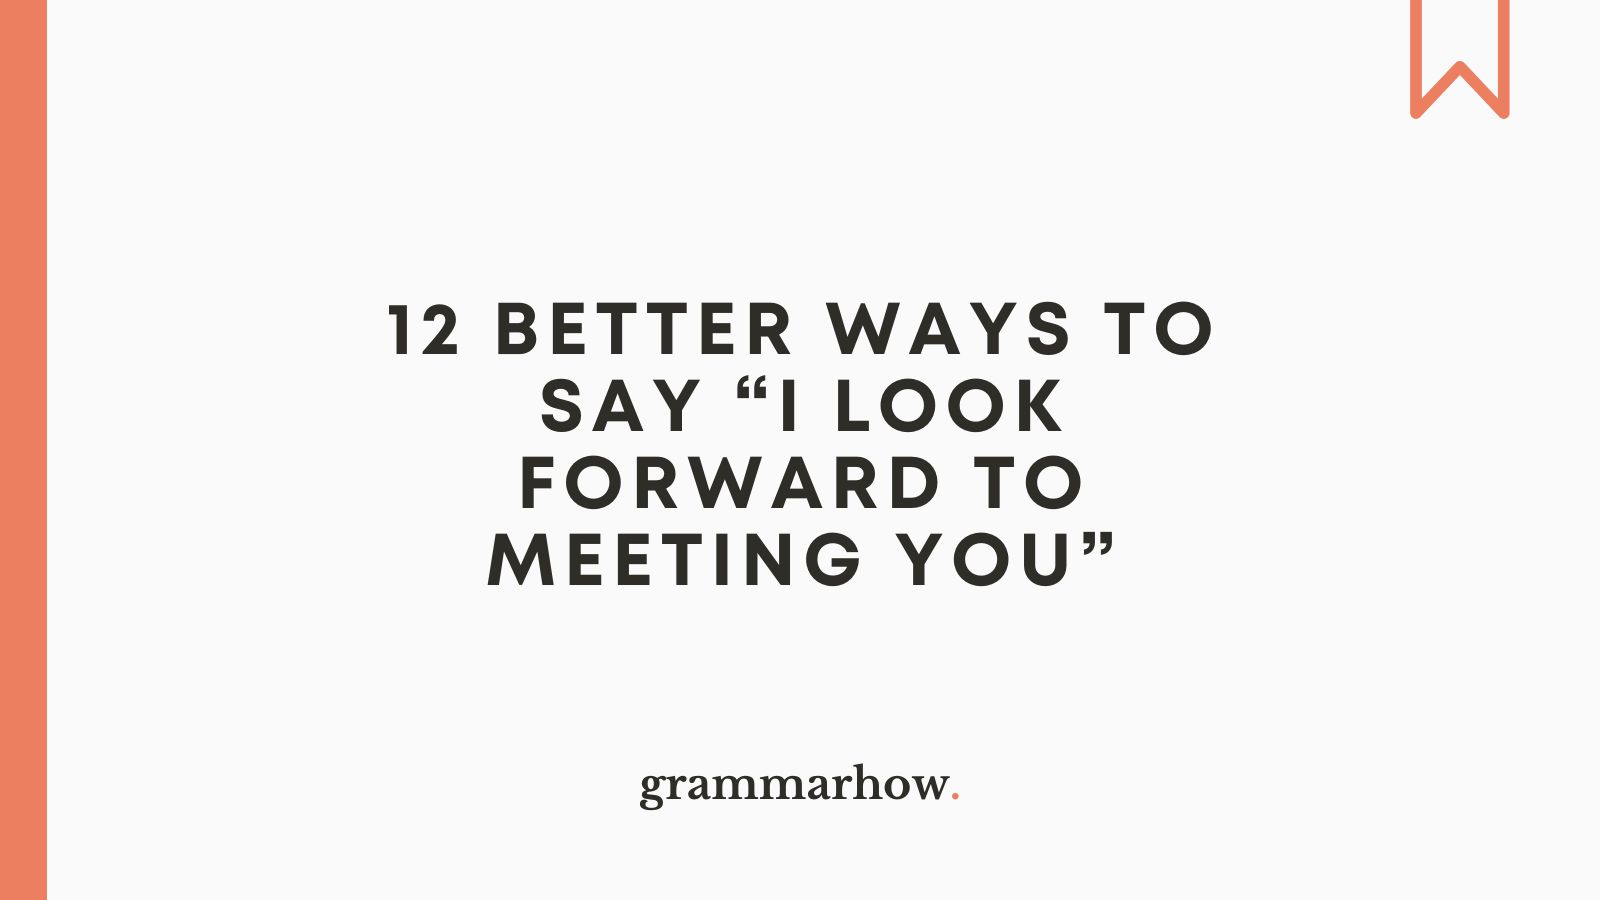 12 Better Ways to Say “I Look Forward to Meeting You”